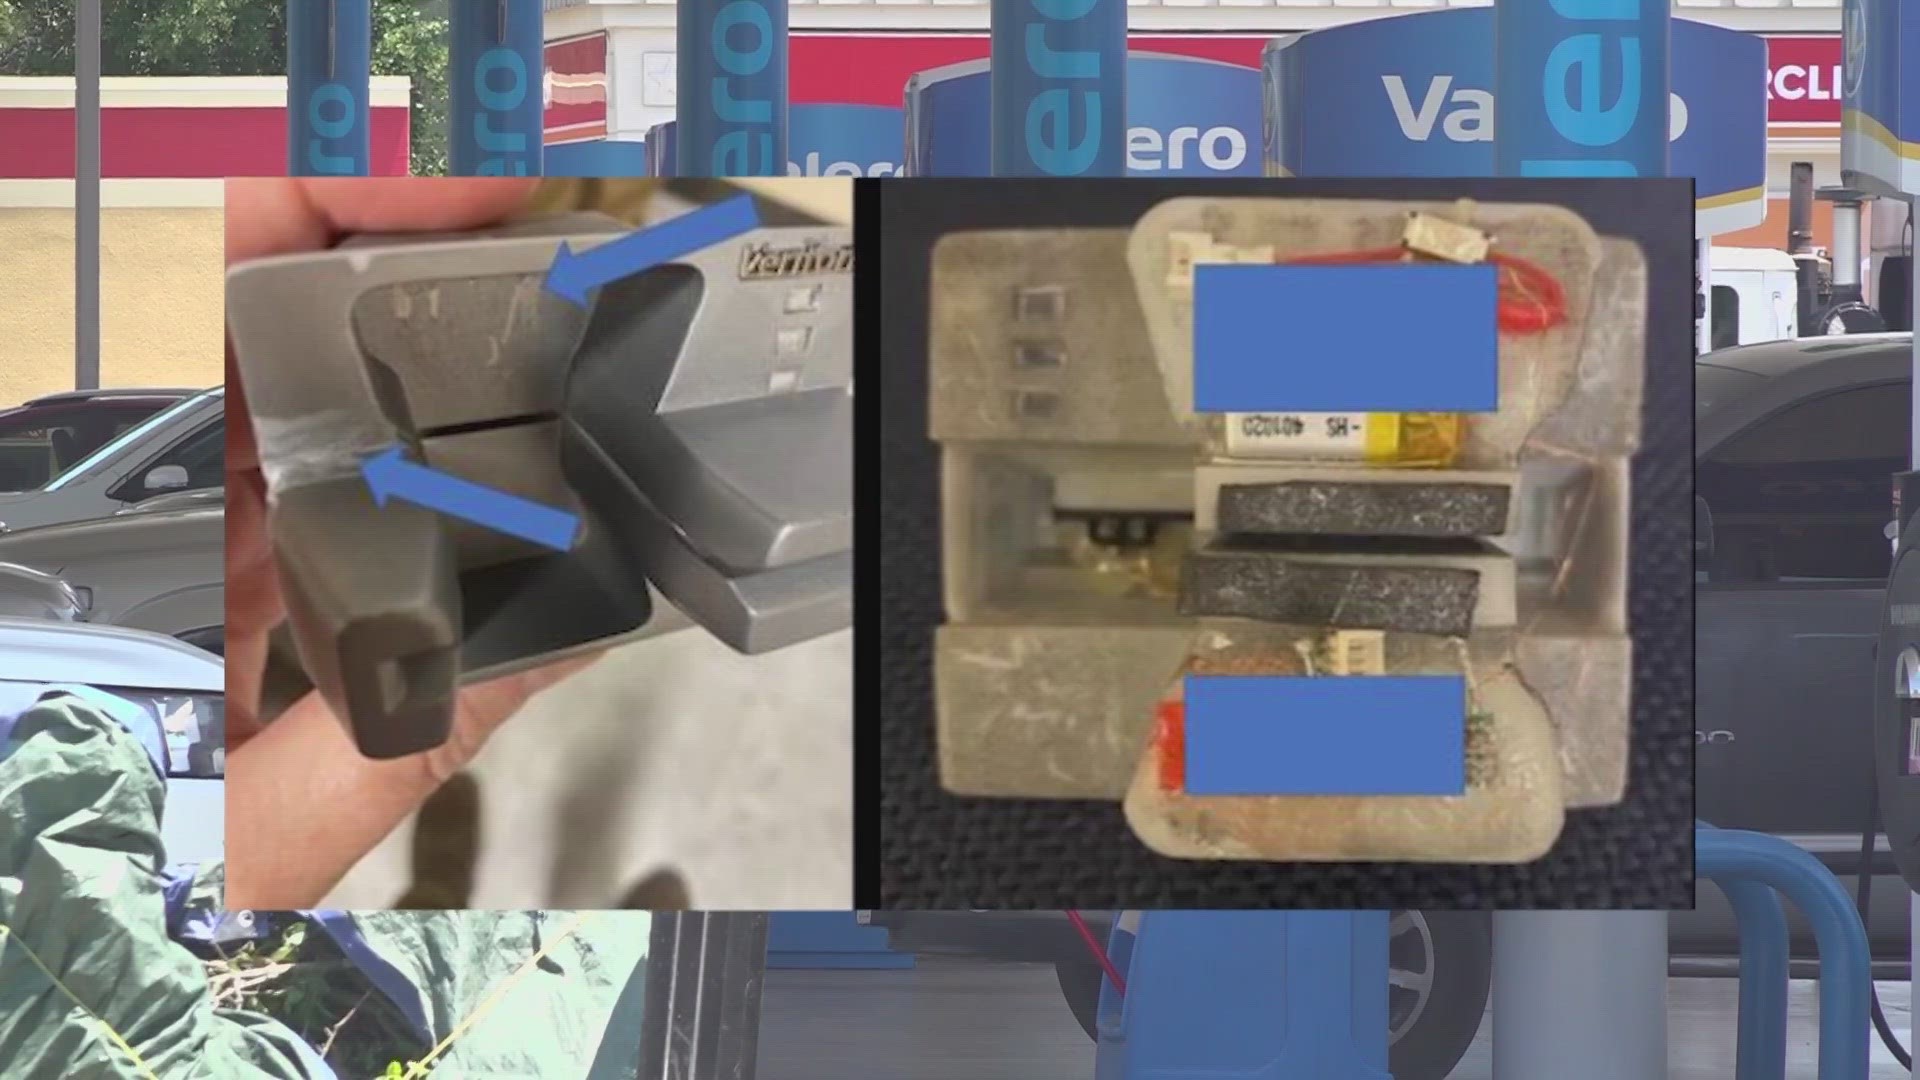 Make sure to check the card reader at your pump and see if it wiggles. Here's what else you should look out for.